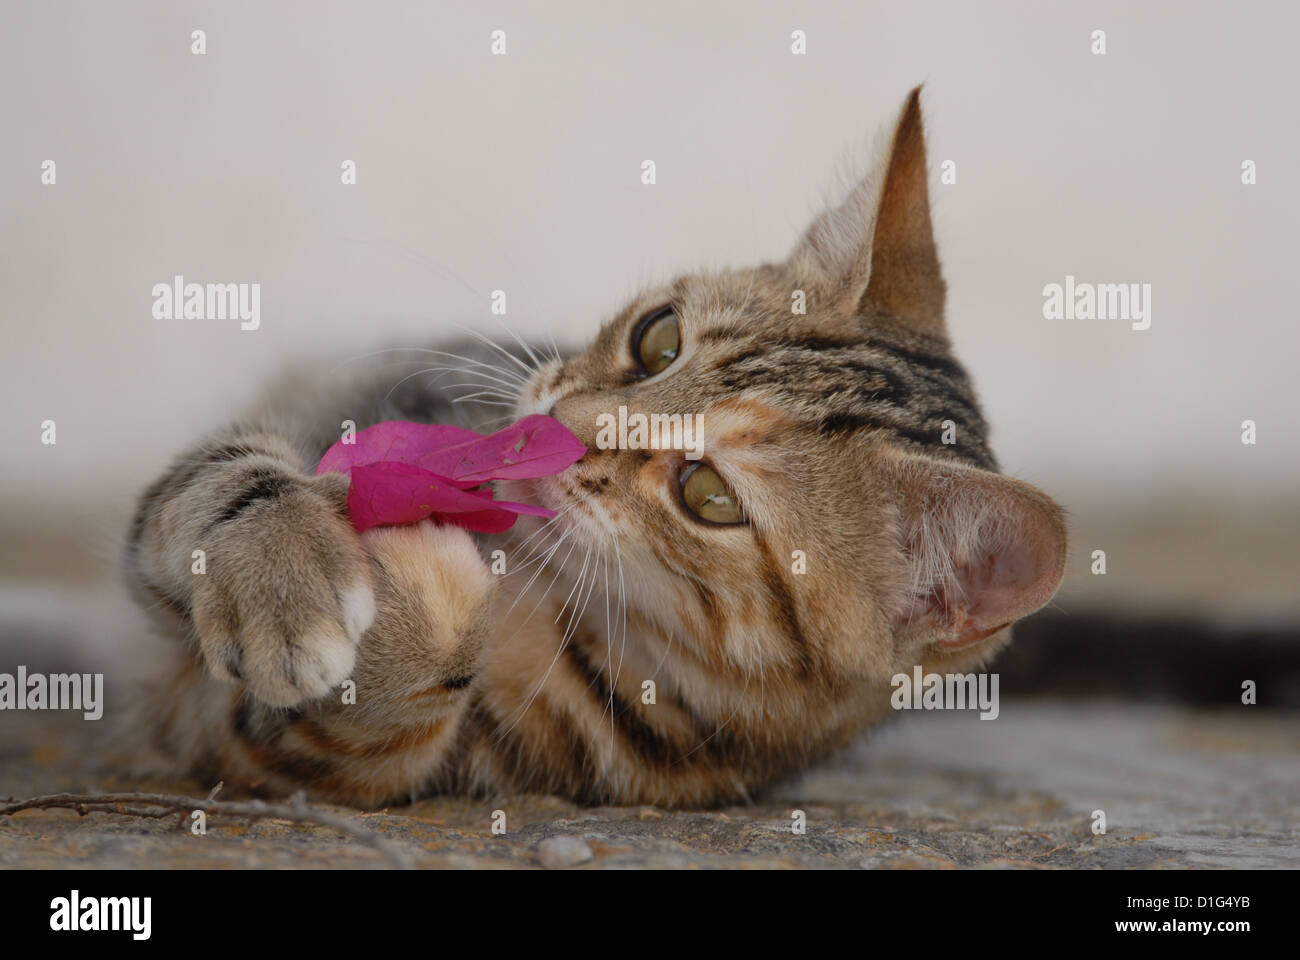 Tortie Tabby (Torbie) and White, is lying on a rocky step, playing with a blossom of Bougainvillea, Greece, Dodecanese Island, Stock Photo